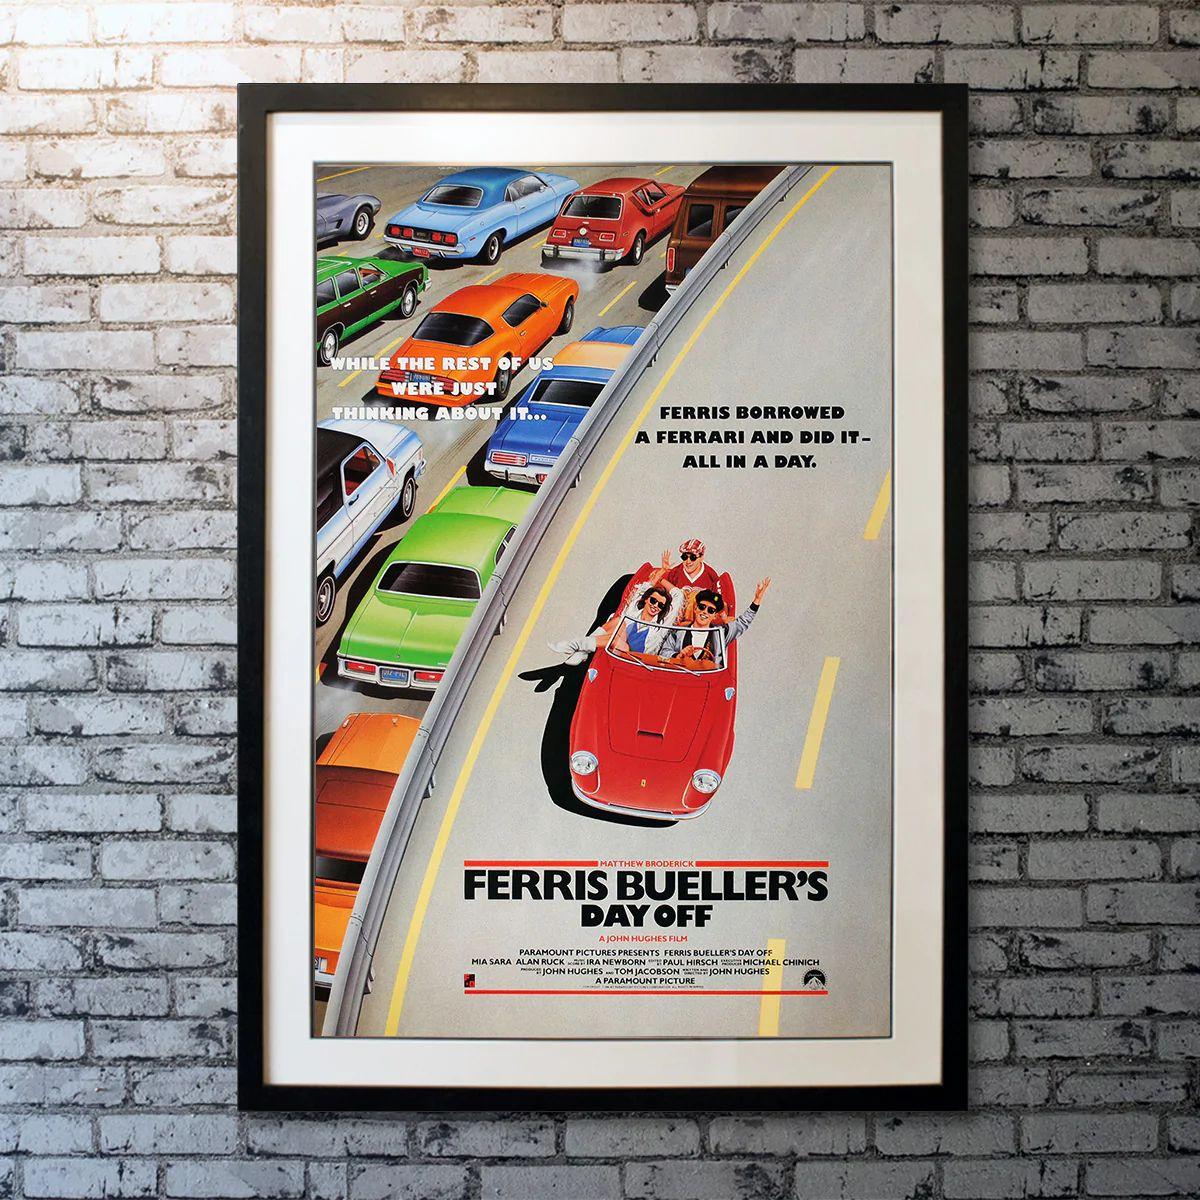 Ferris Bueller's Day Off, Unframed Poster, 1986

Original One Sheet (27 x 41 inches). Bueller...Bueller...Bueller...Who can forget the roll call scene from this teen classic directed by the master of the genre, John Hughes? Matthew Broderick is